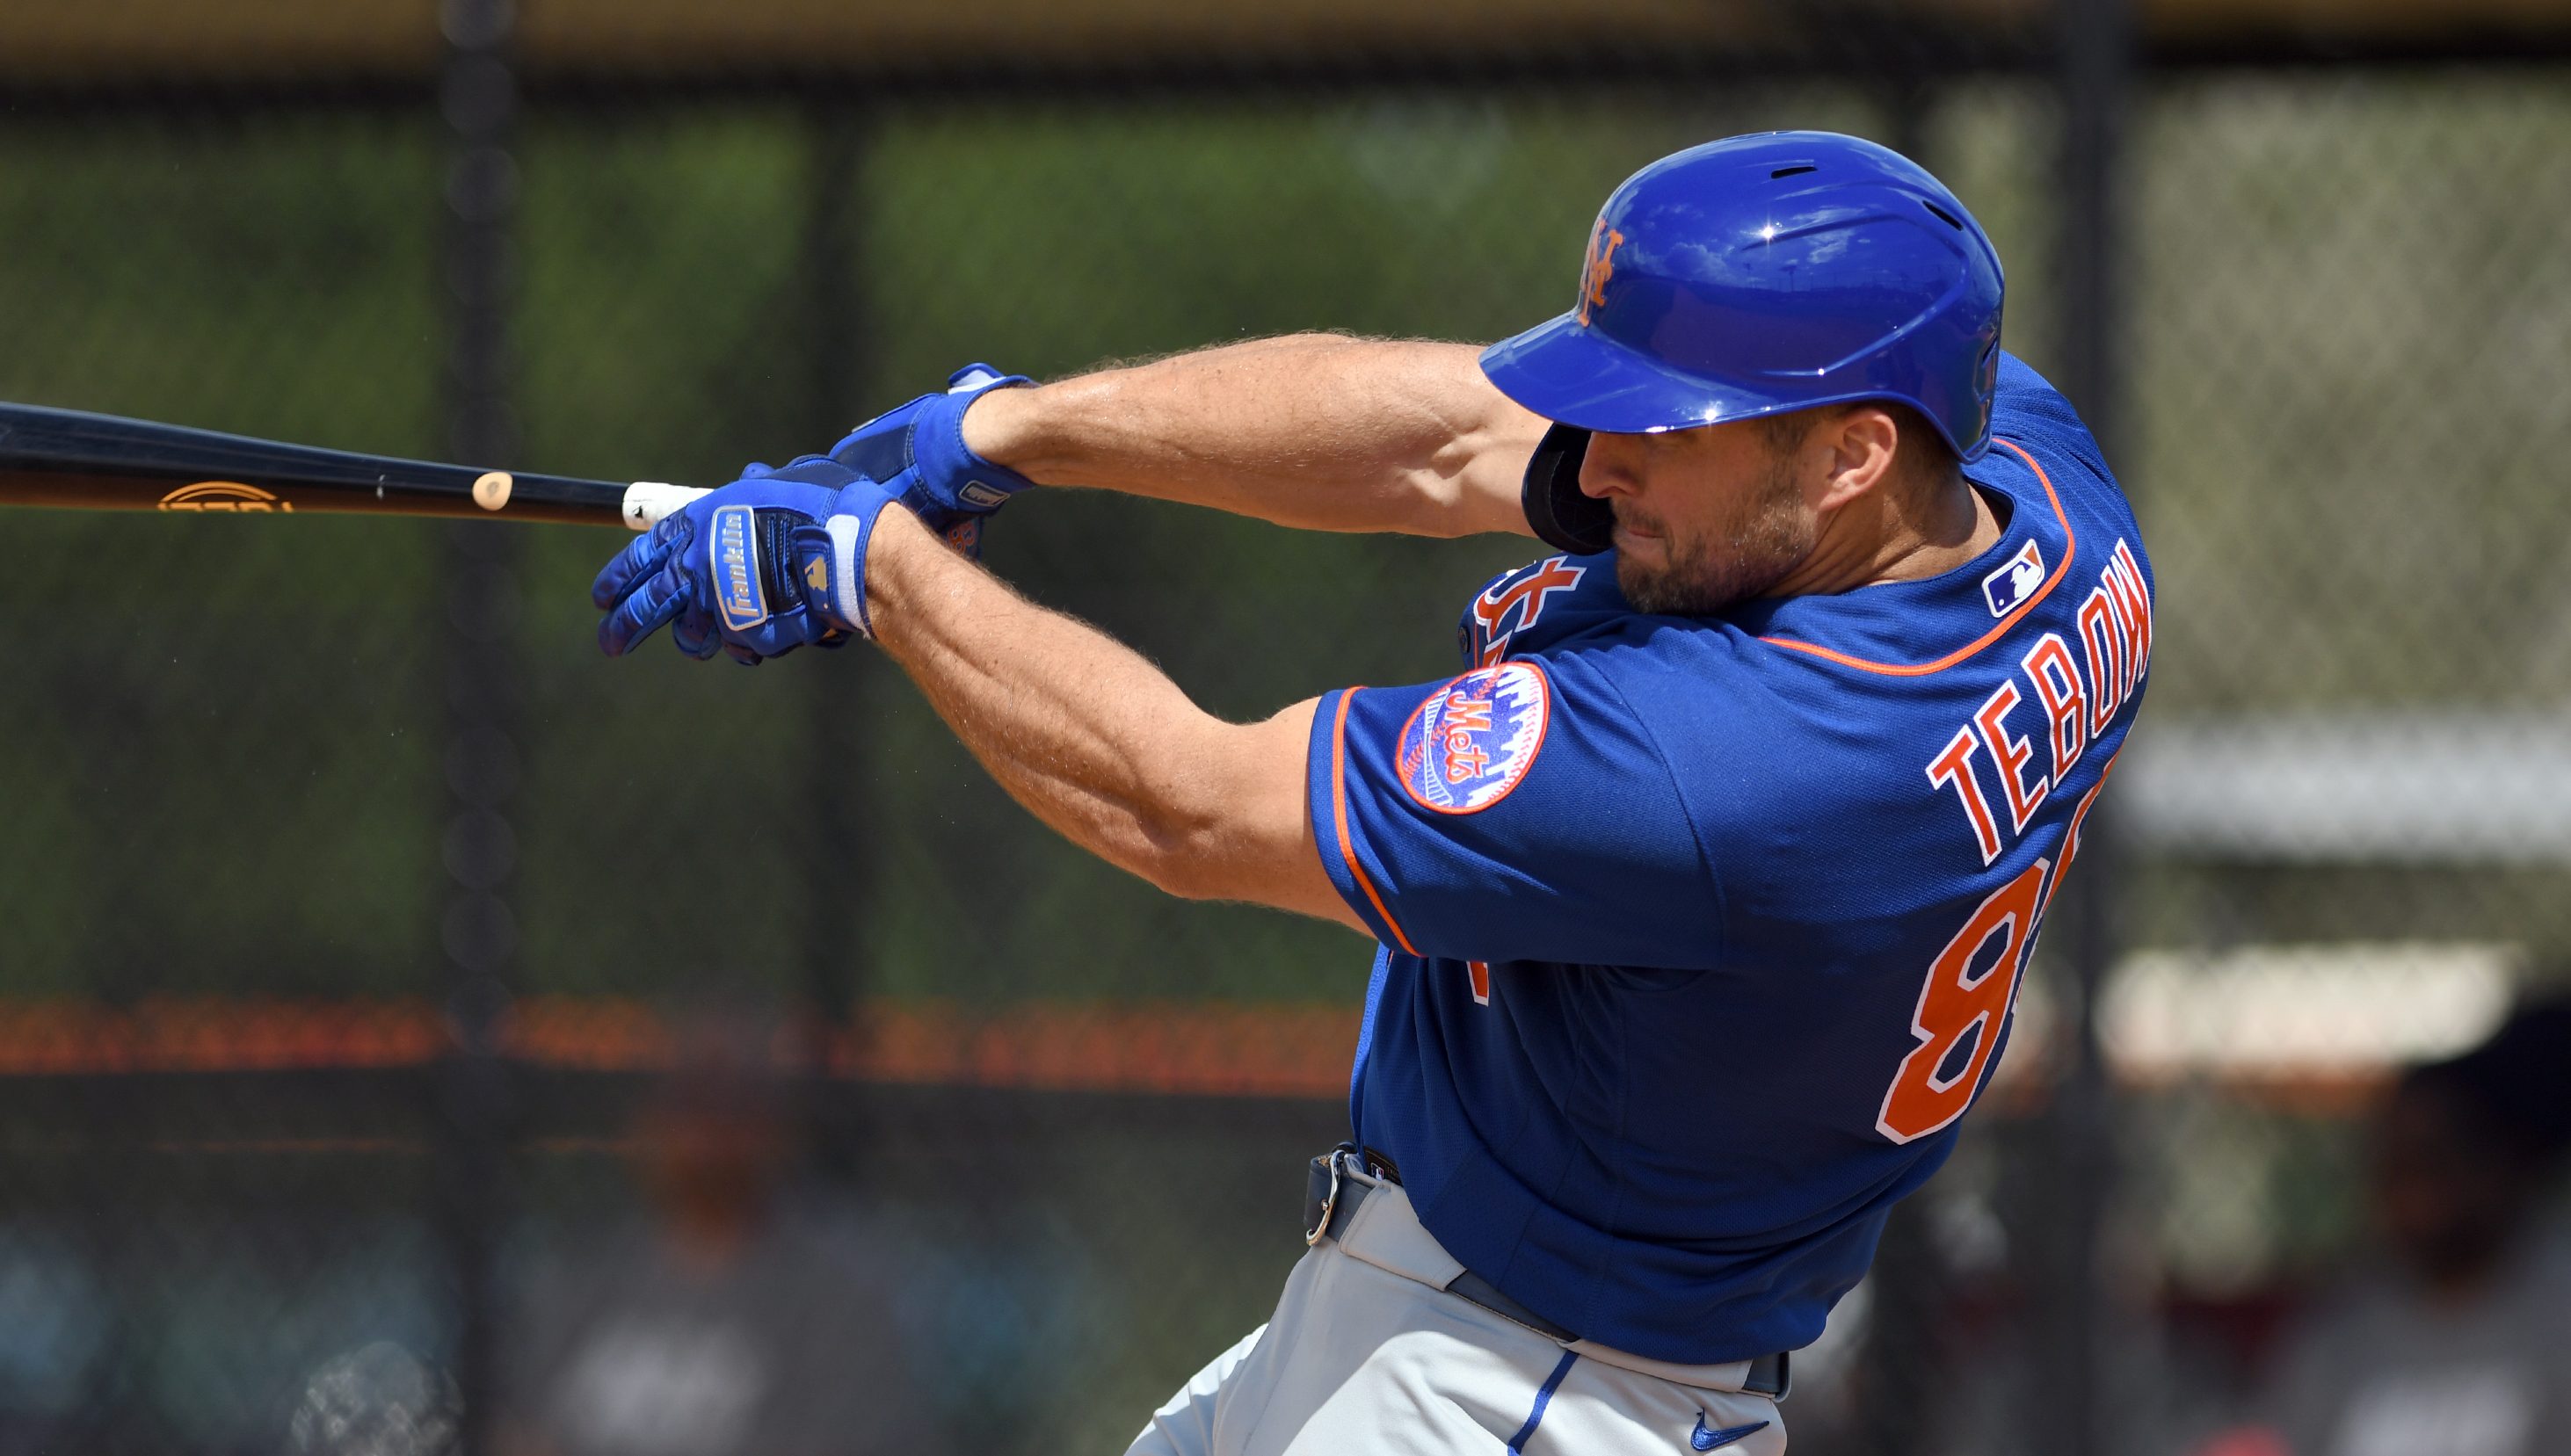 Baseball fans trolling the Mets for another Tim Tebow Spring